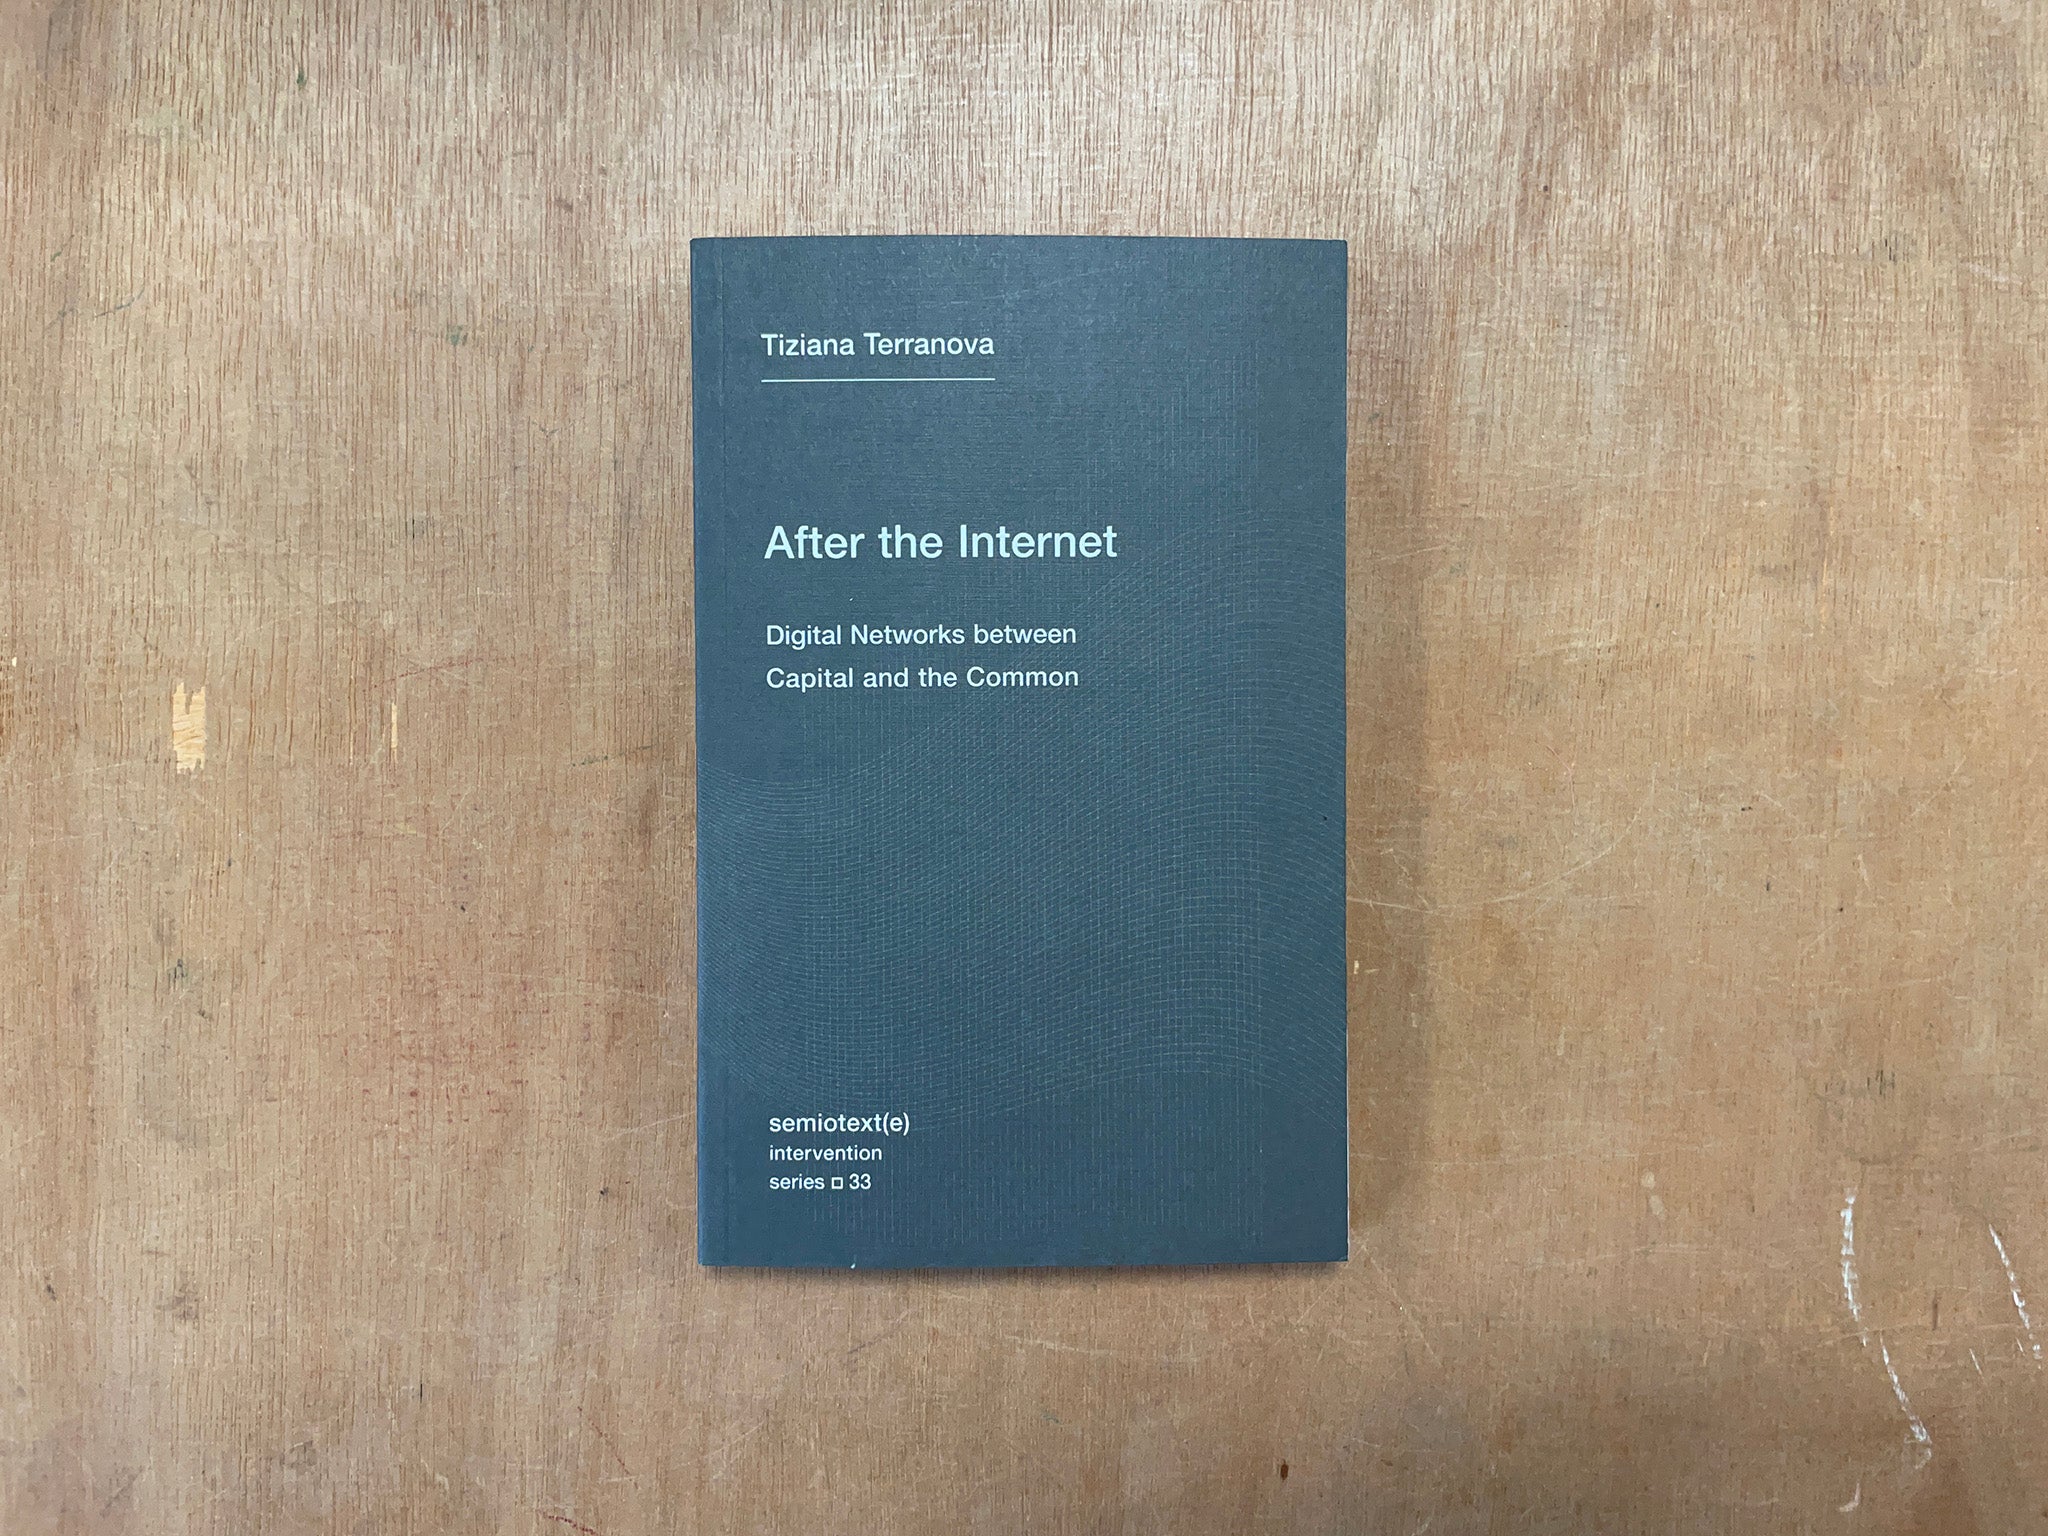 AFTER THE INTERNET: DIGITAL NETWORKS BETWEEN CAPITAL AND THE COMMON by Tiziana Terranova